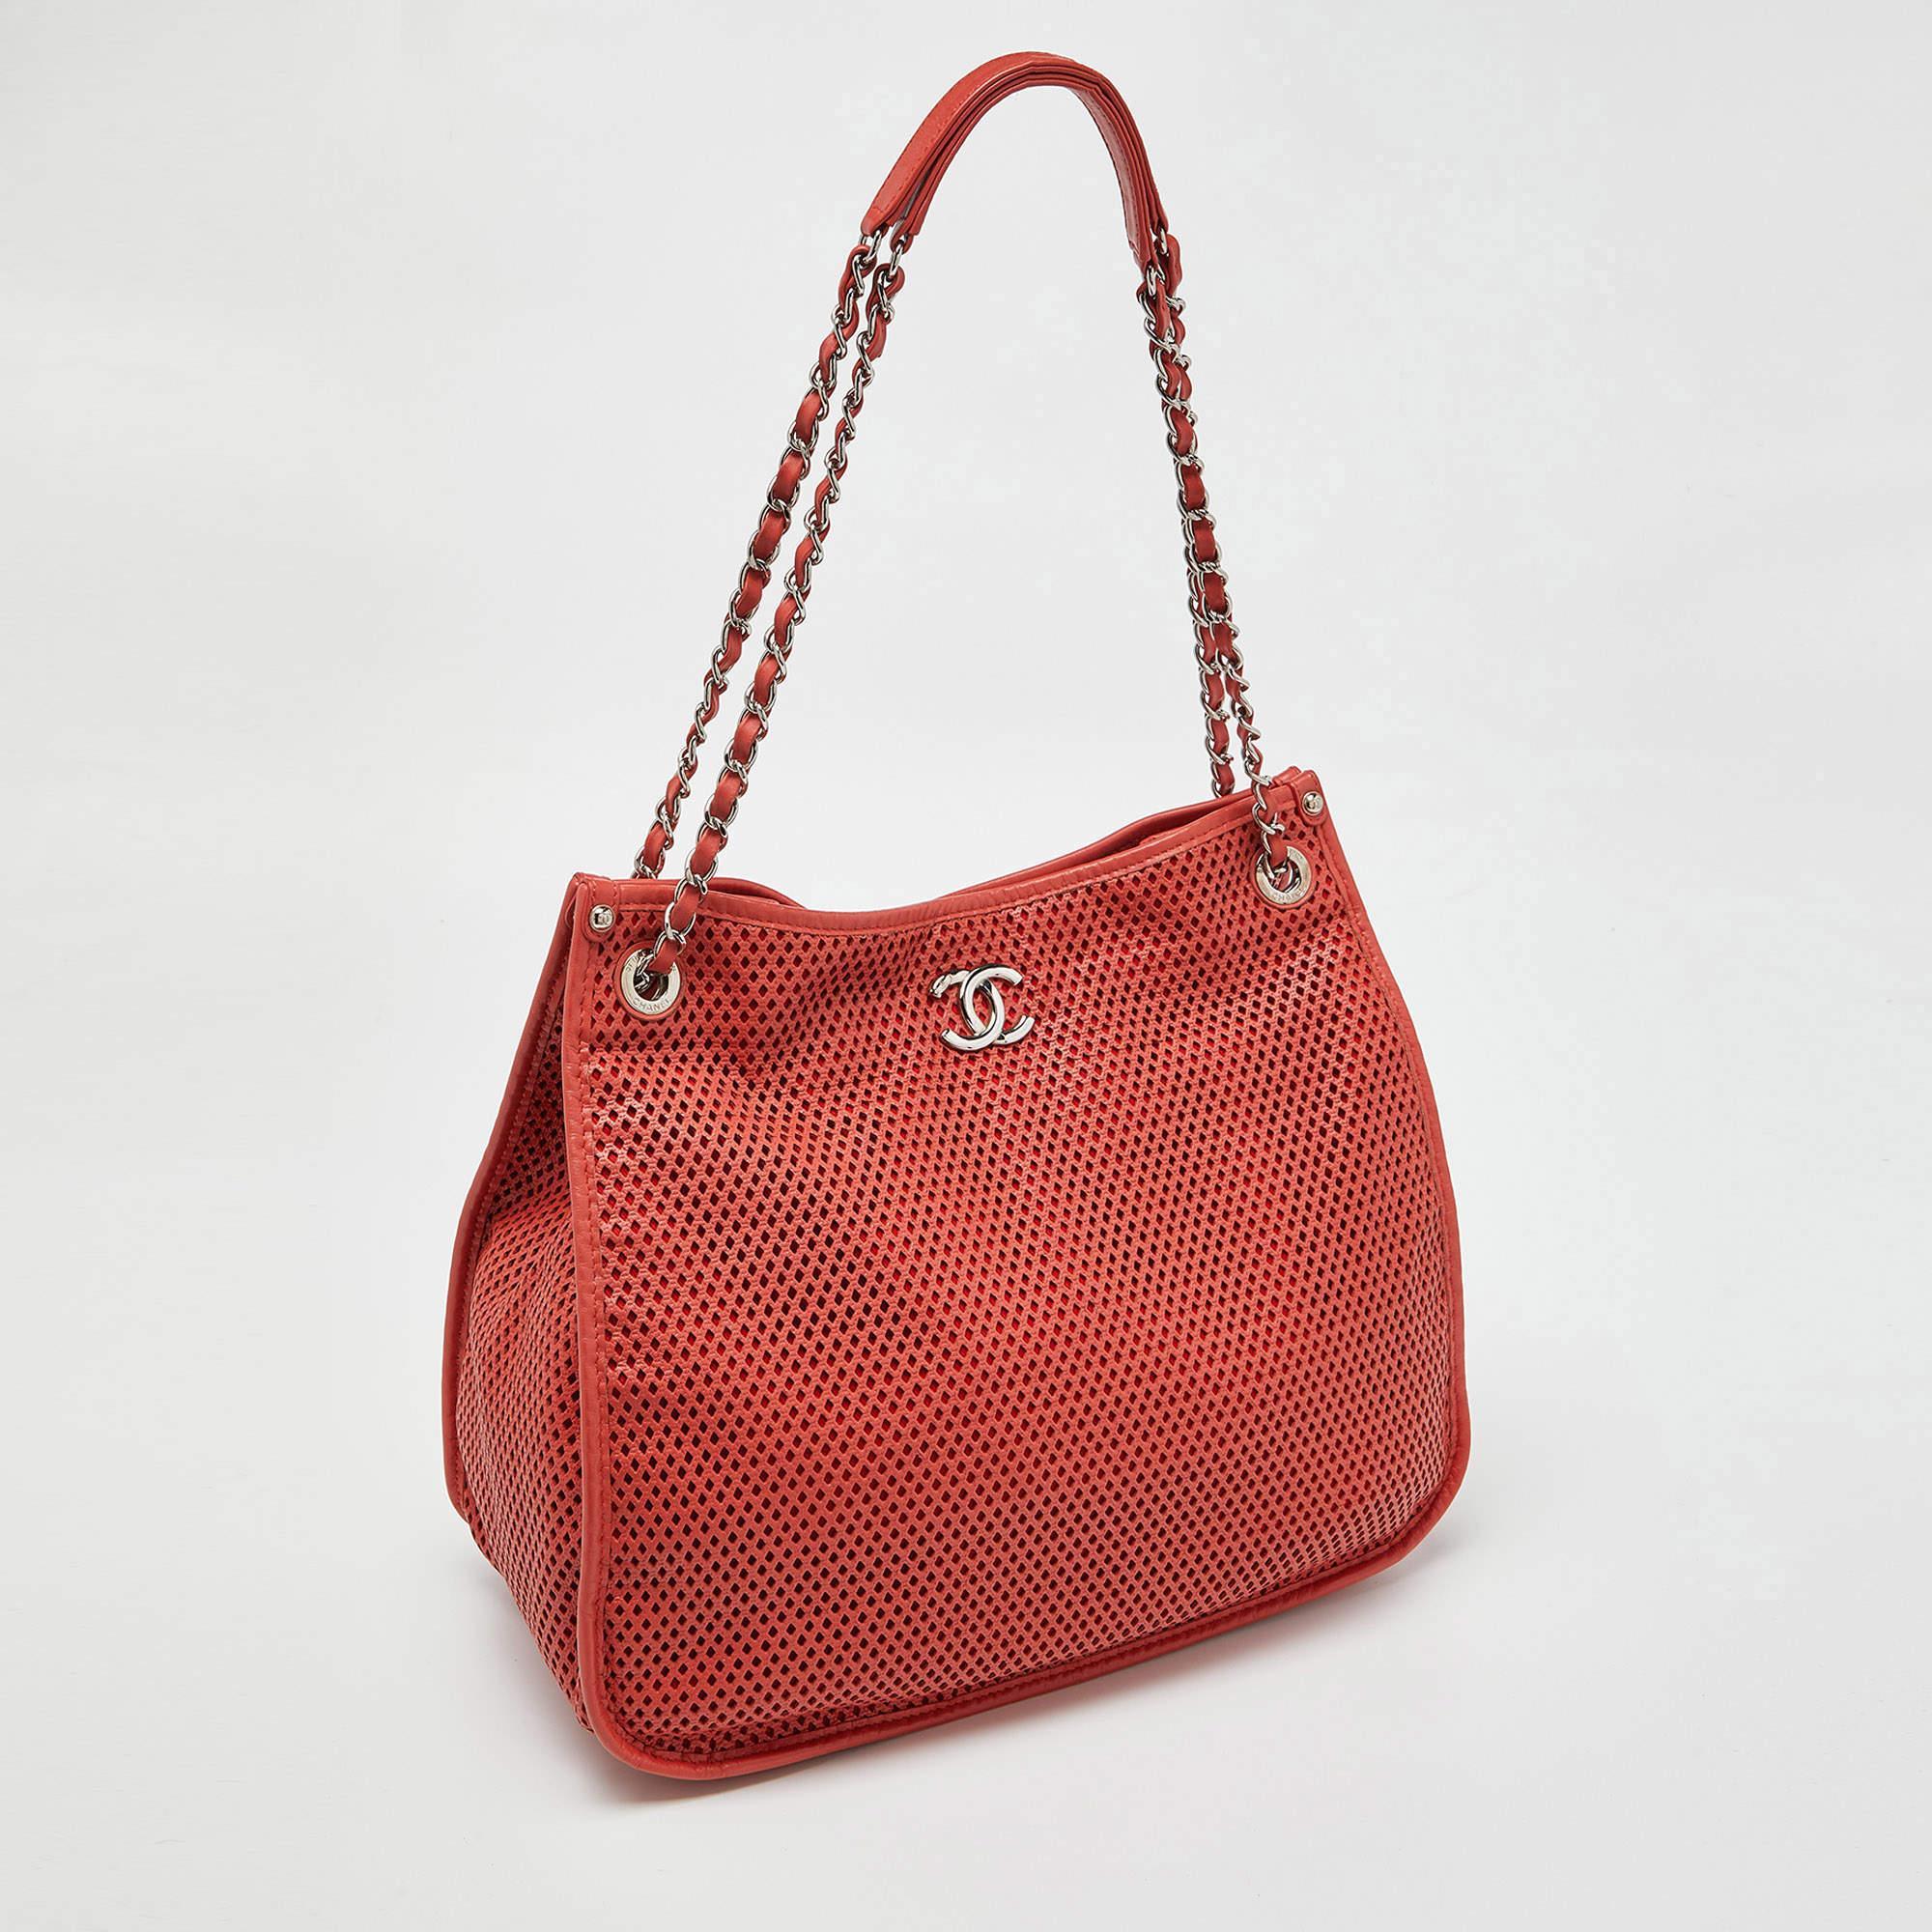 Chanel Red Perforated Leather Up in the Air Shoulder Bag 1